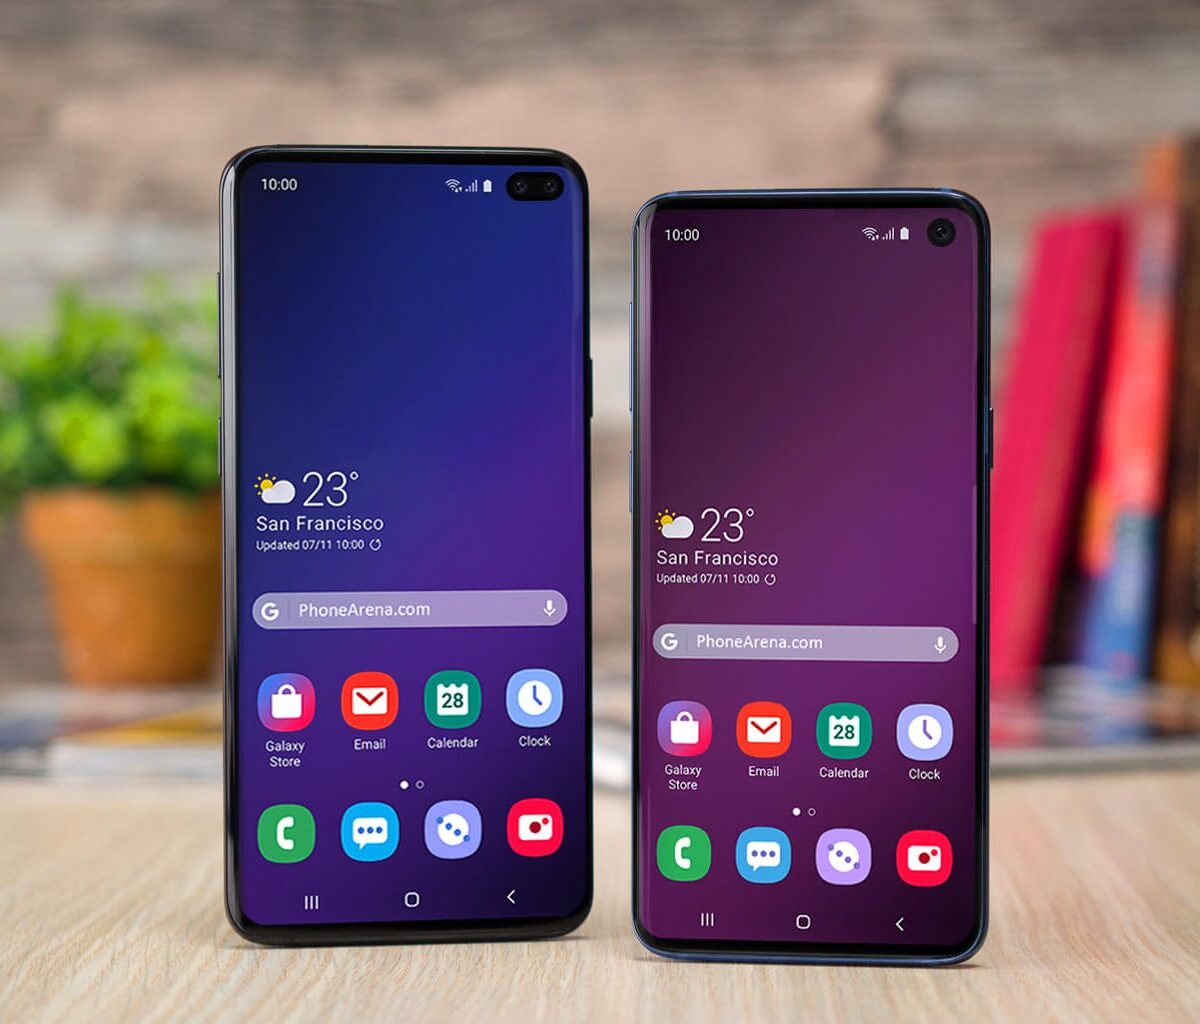 Galaxy s10 s10 and s10e release date price news and leaks e1549989913800